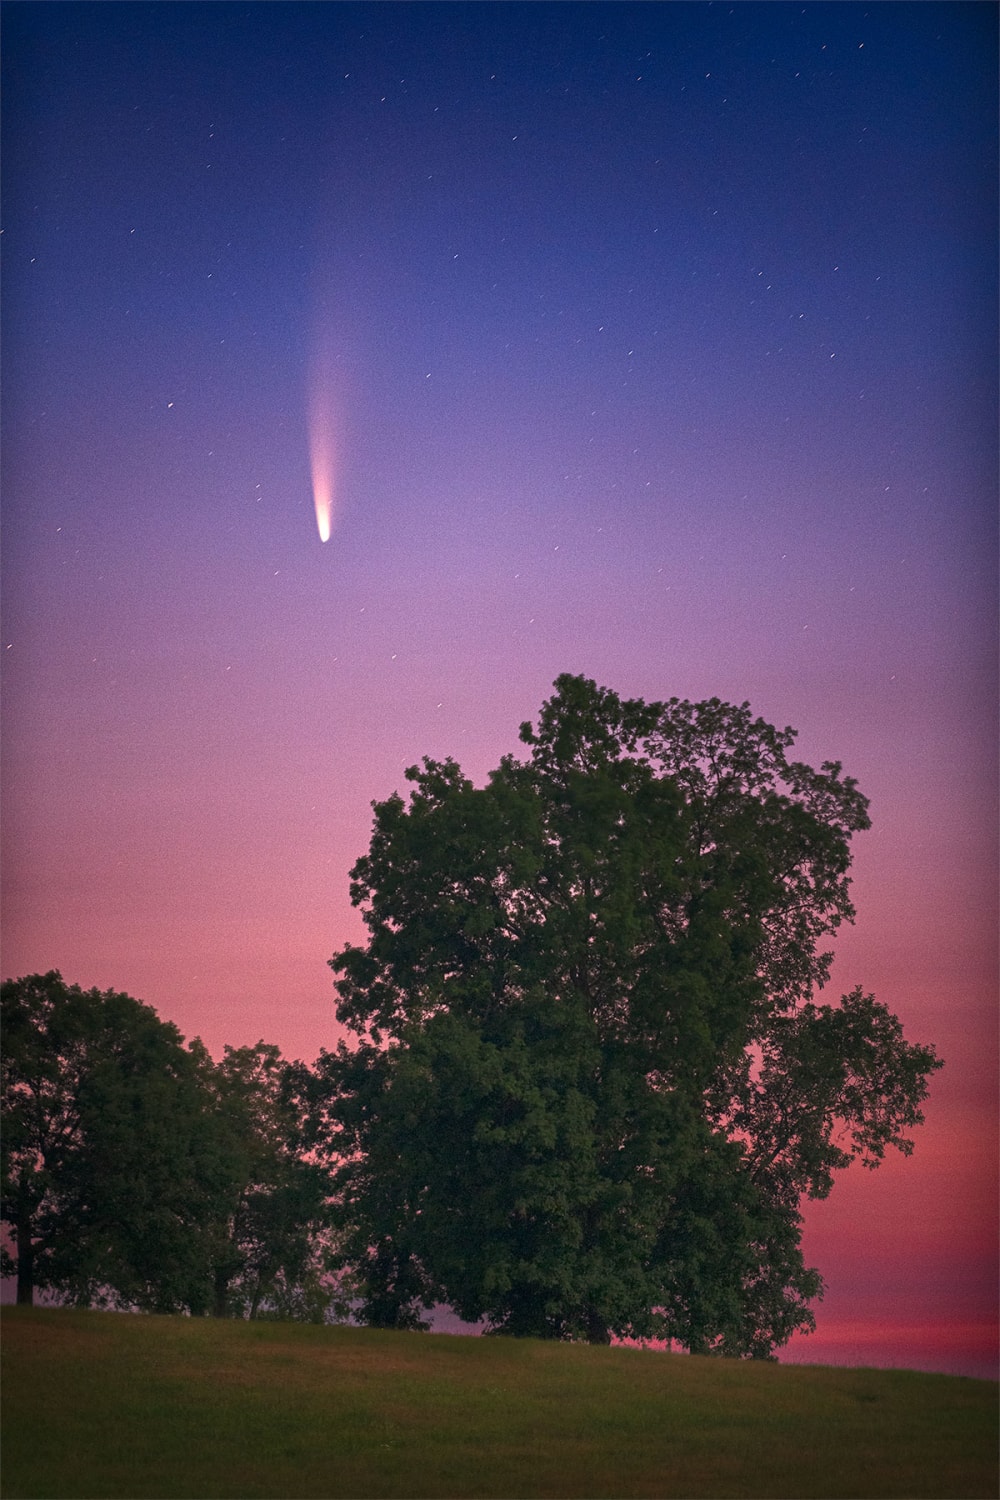 I captured this single exposure of a naked eye visible comet in the early morning sky and it won't be back to our solar system for another 6,000 years